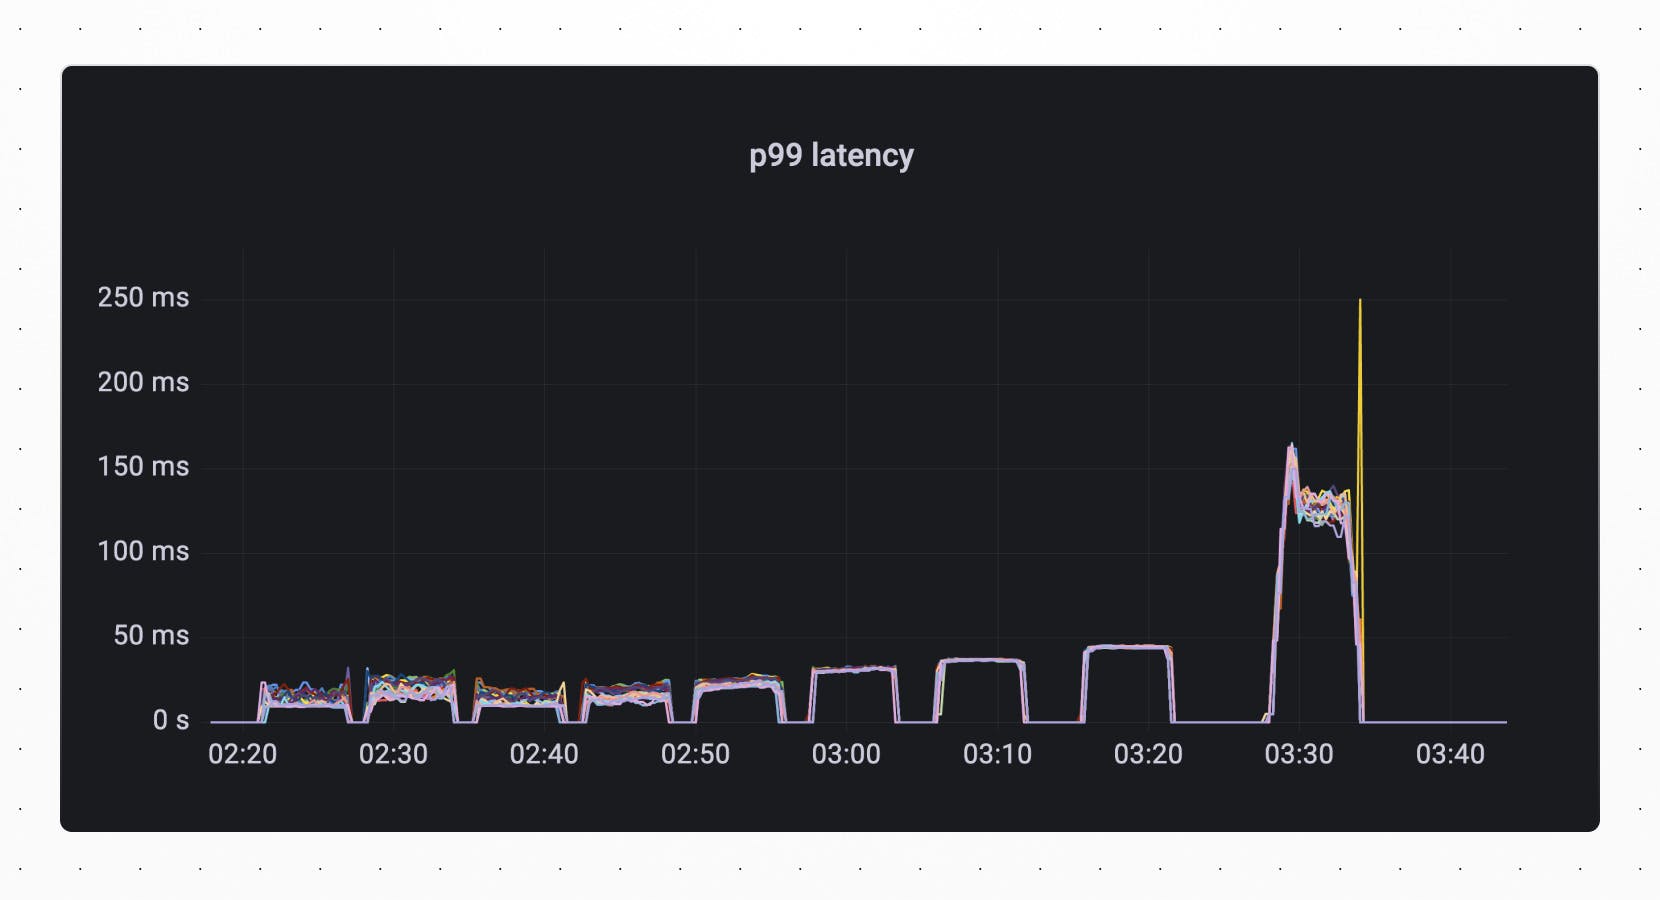 p99 latency -- chart progressively going up as time increases and spiking toward the end